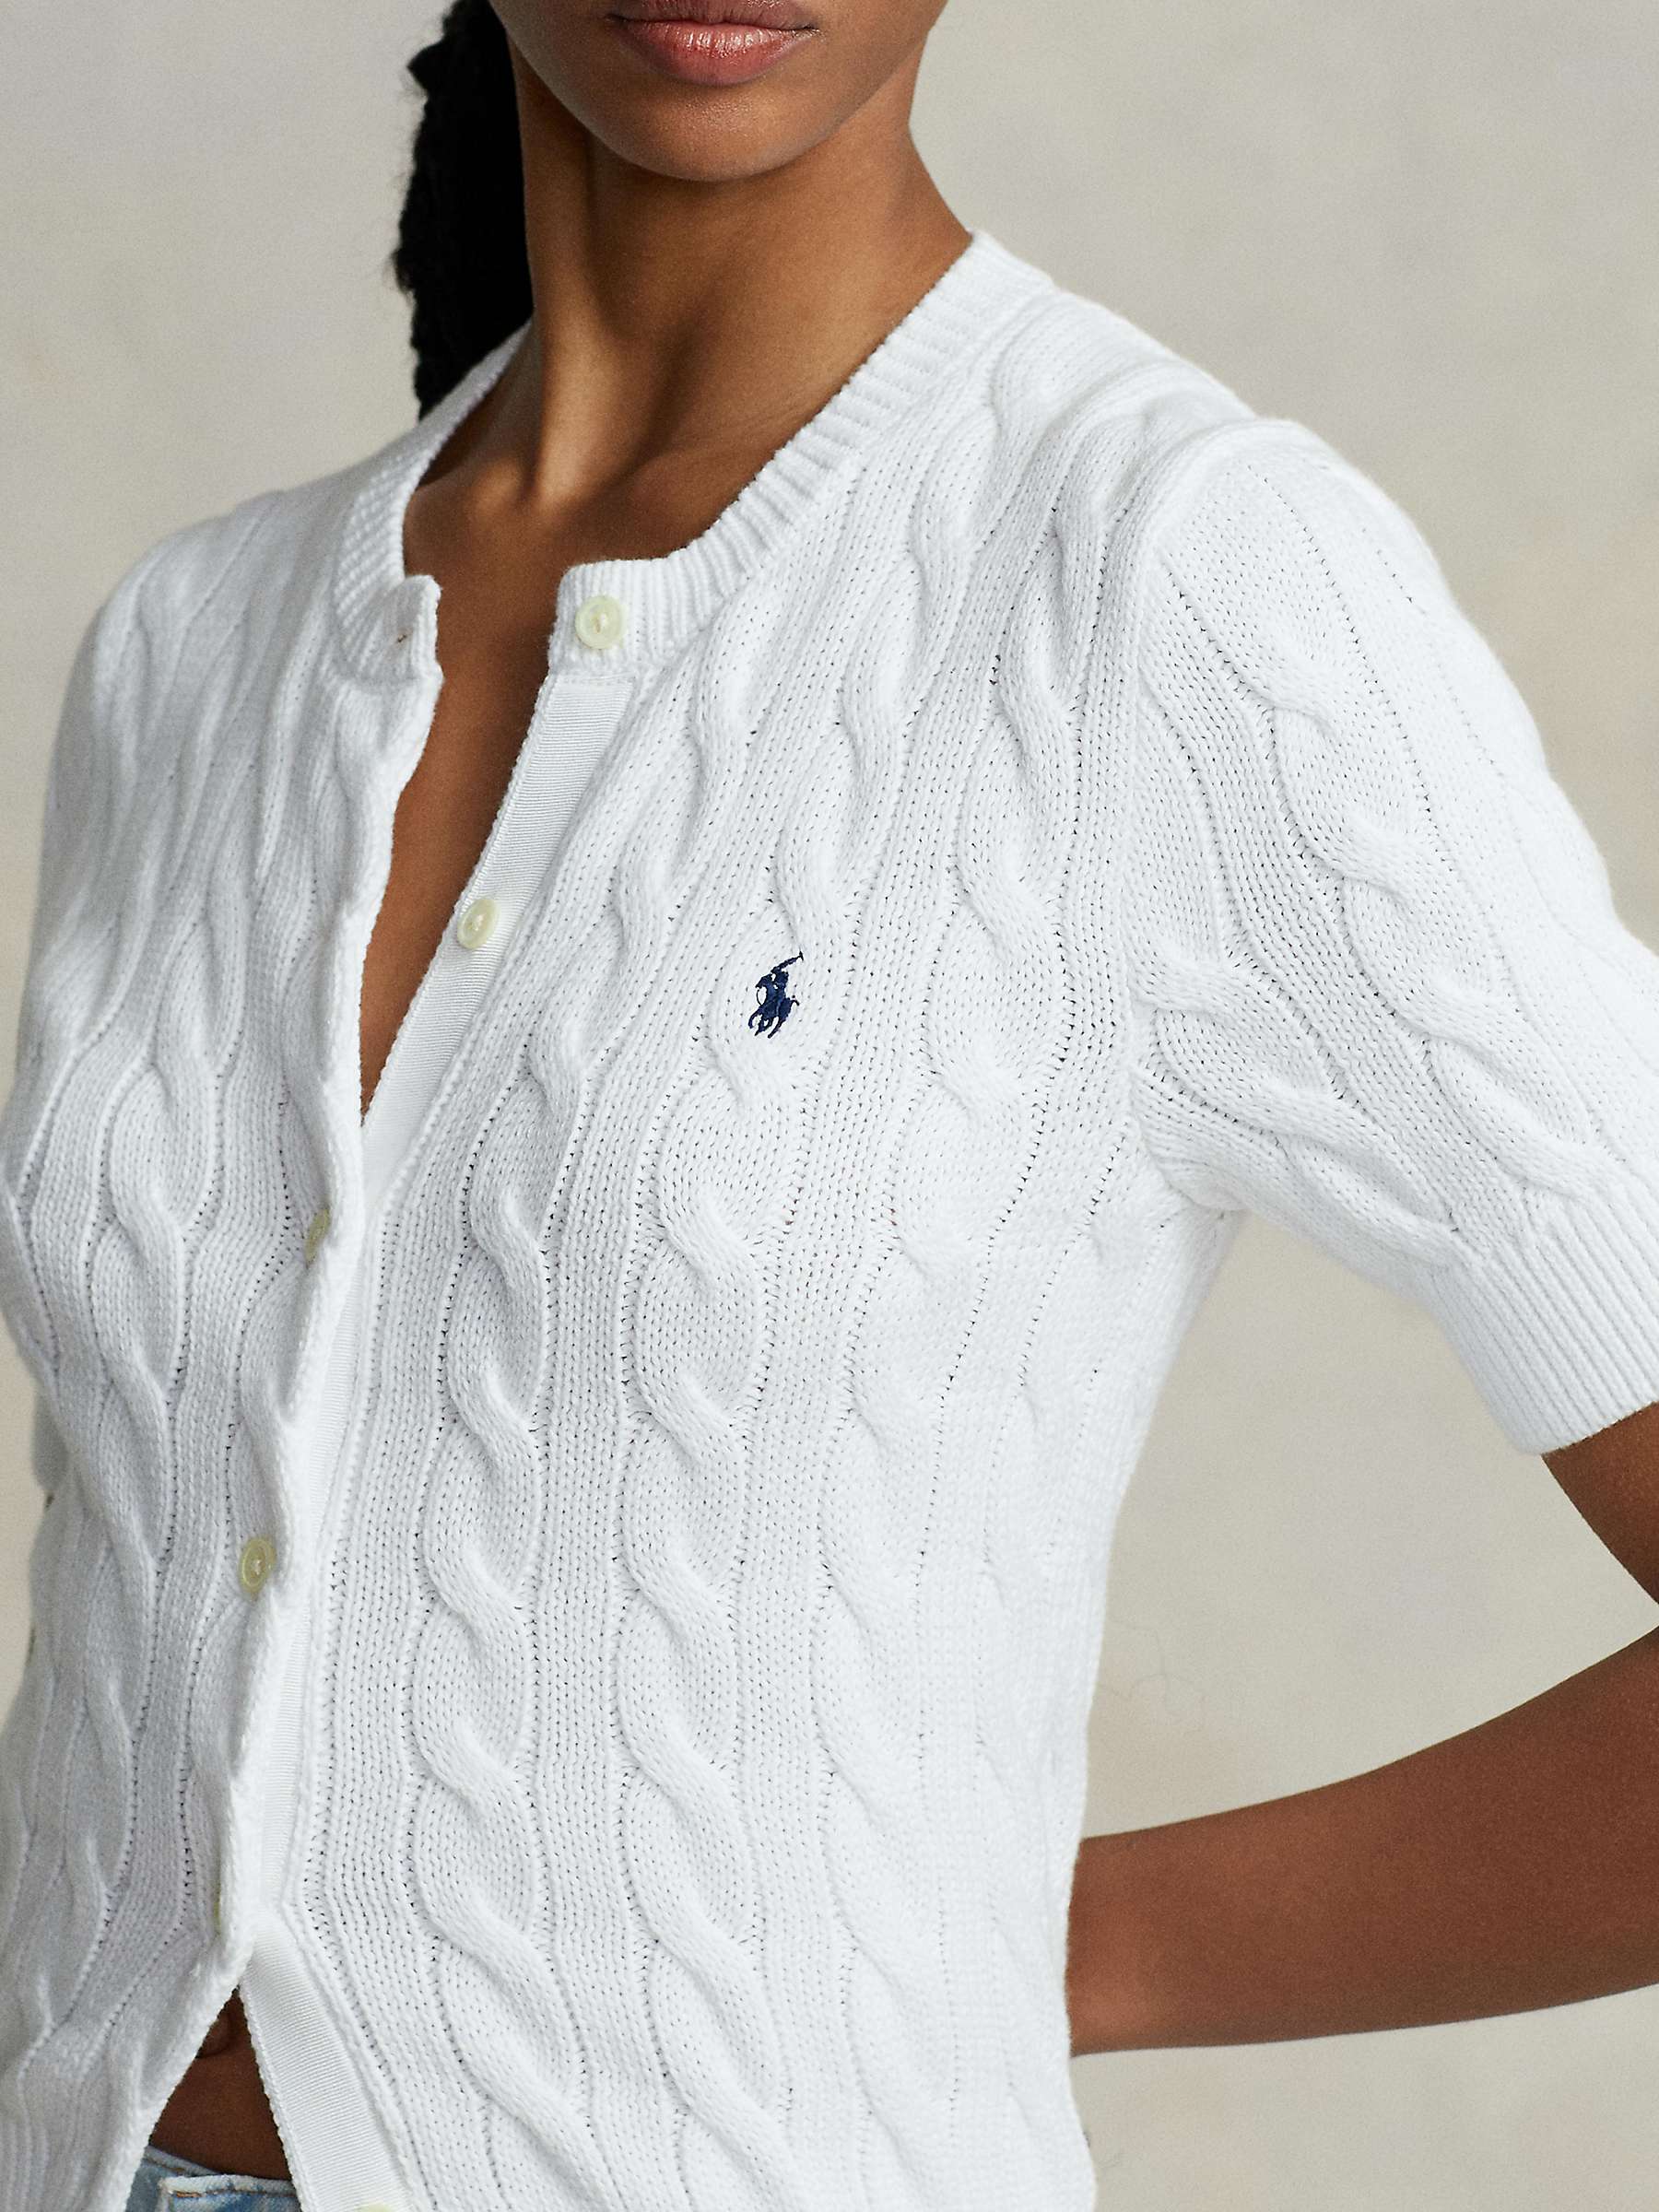 Buy Polo Ralph Lauren Cable Knit Short Sleeve Cardigan, White Online at johnlewis.com